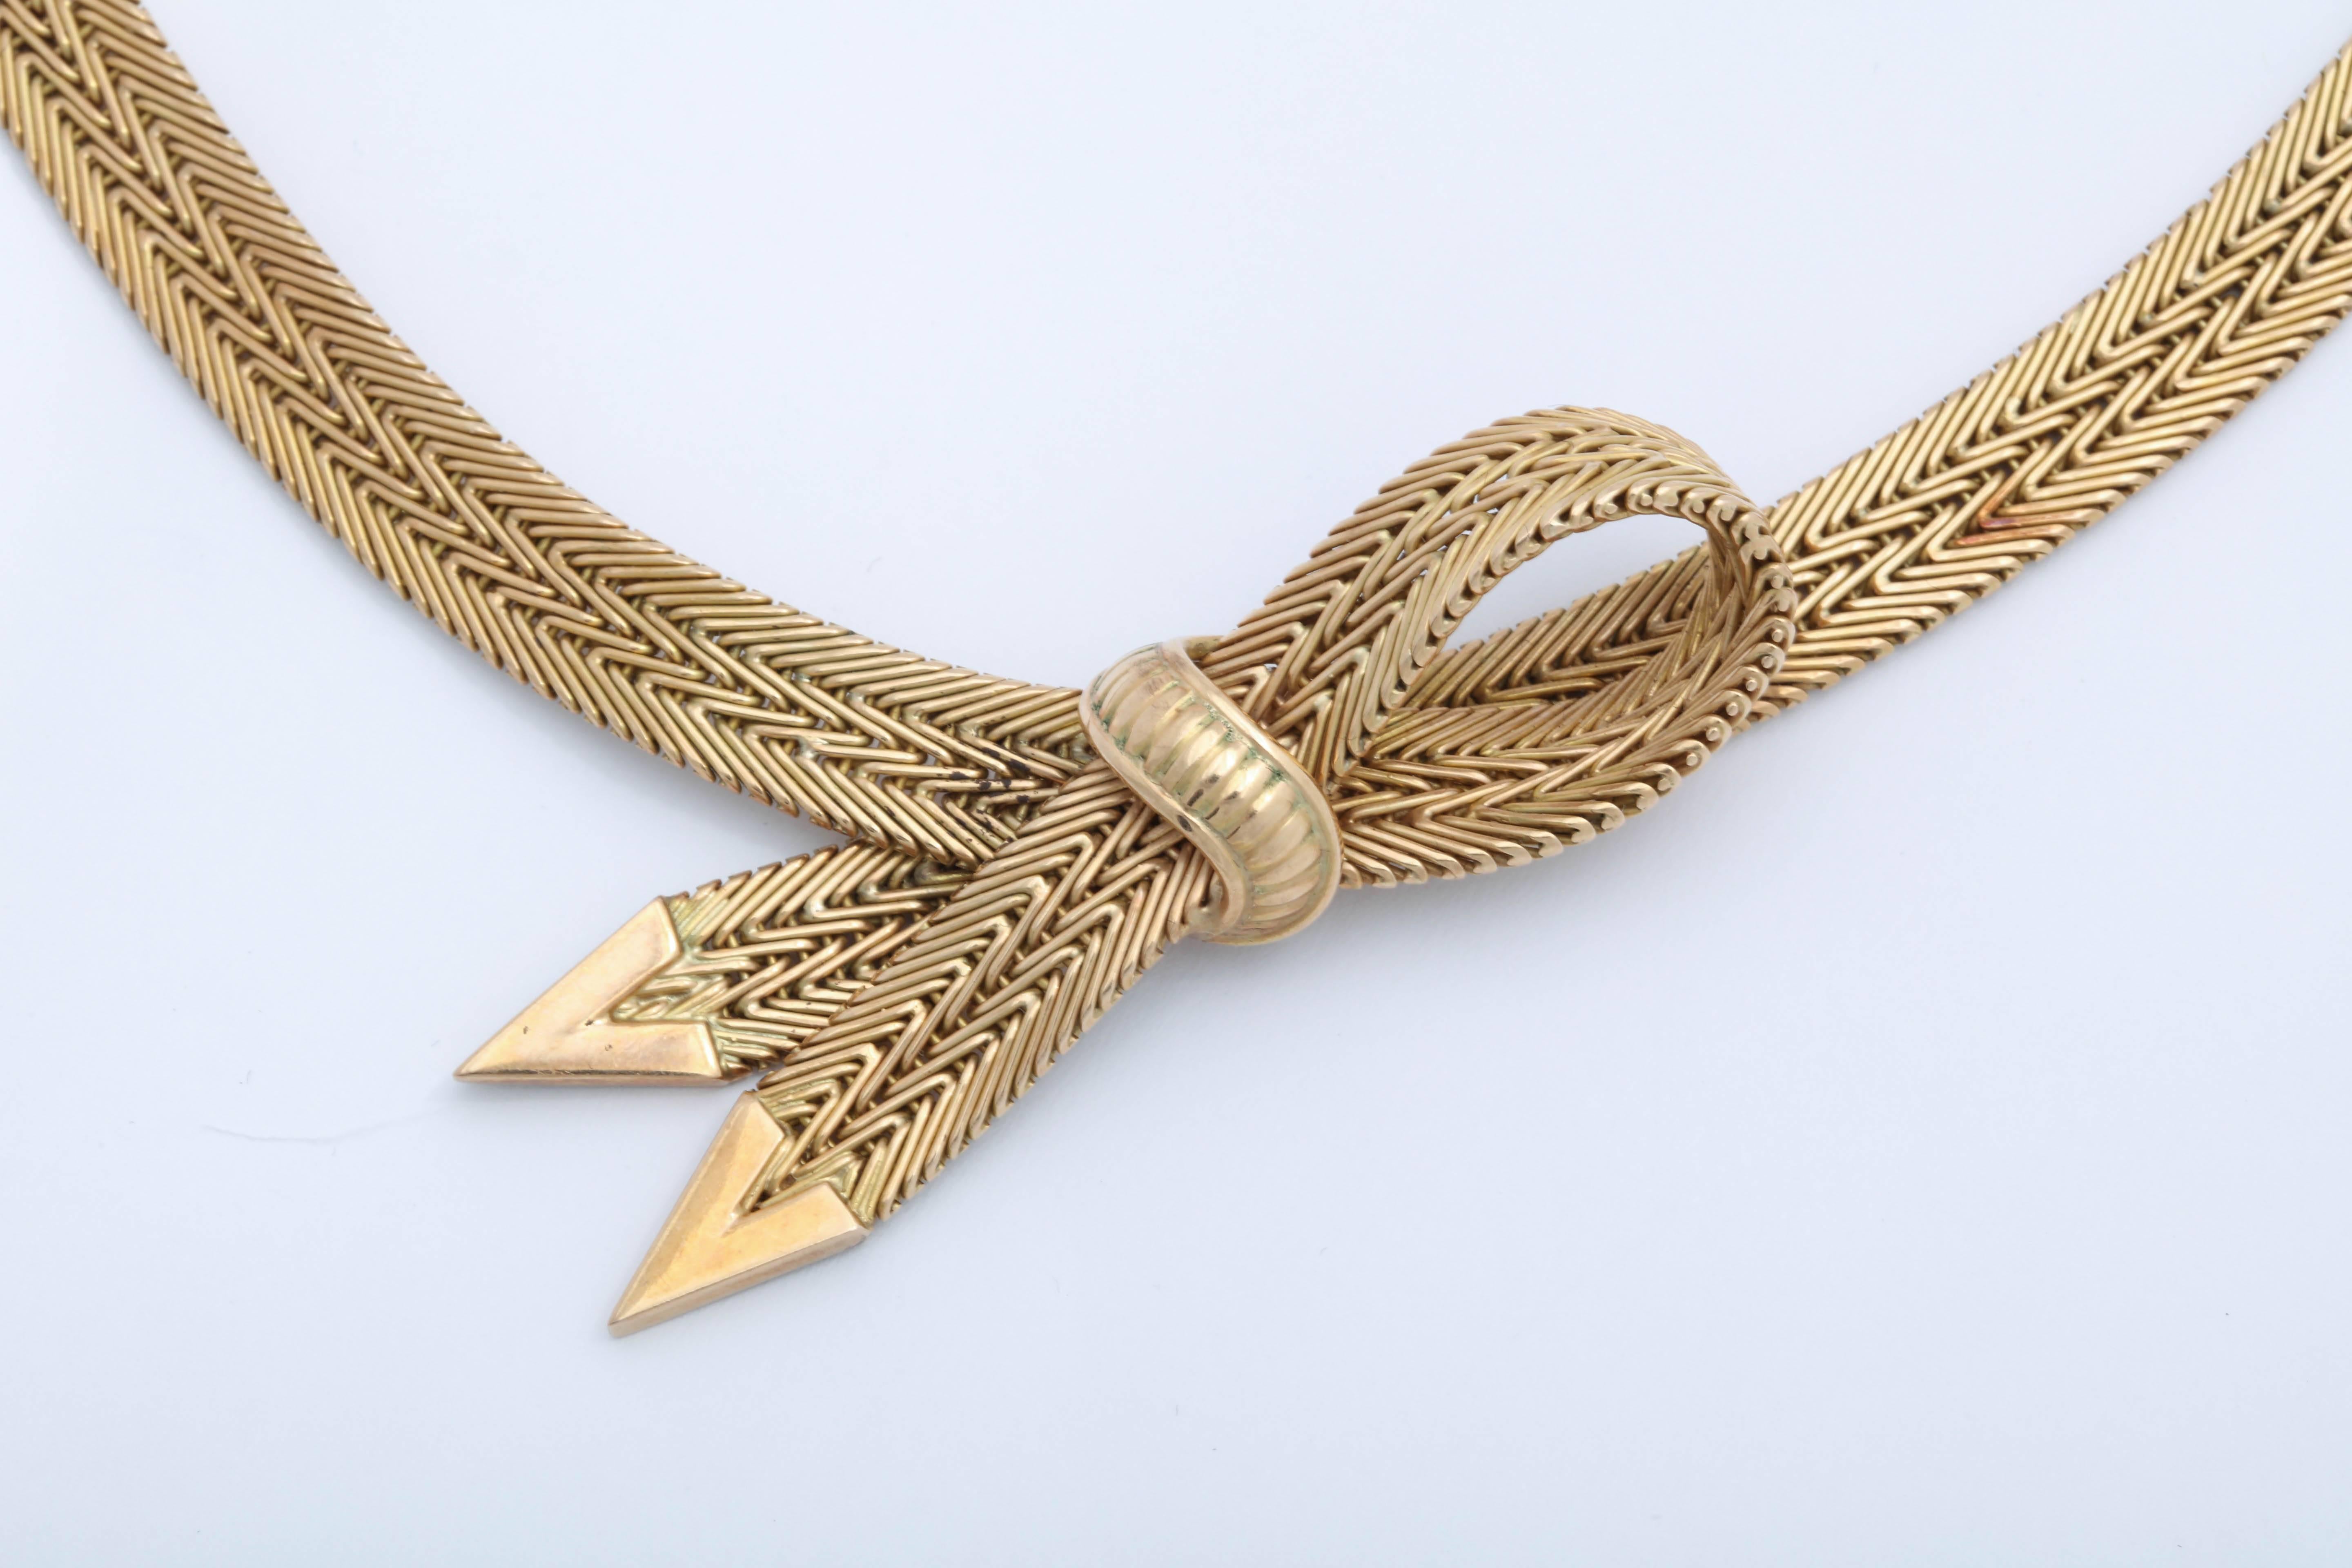 18kt Yellow Gold woven Necklace with center Bow and Box clasp closing and figure 8 safety.  Marked 750 & 18kt and an indistinct Signature.  Possibly Argentina.  Very elegant ribbon like form translated into woven Gold.